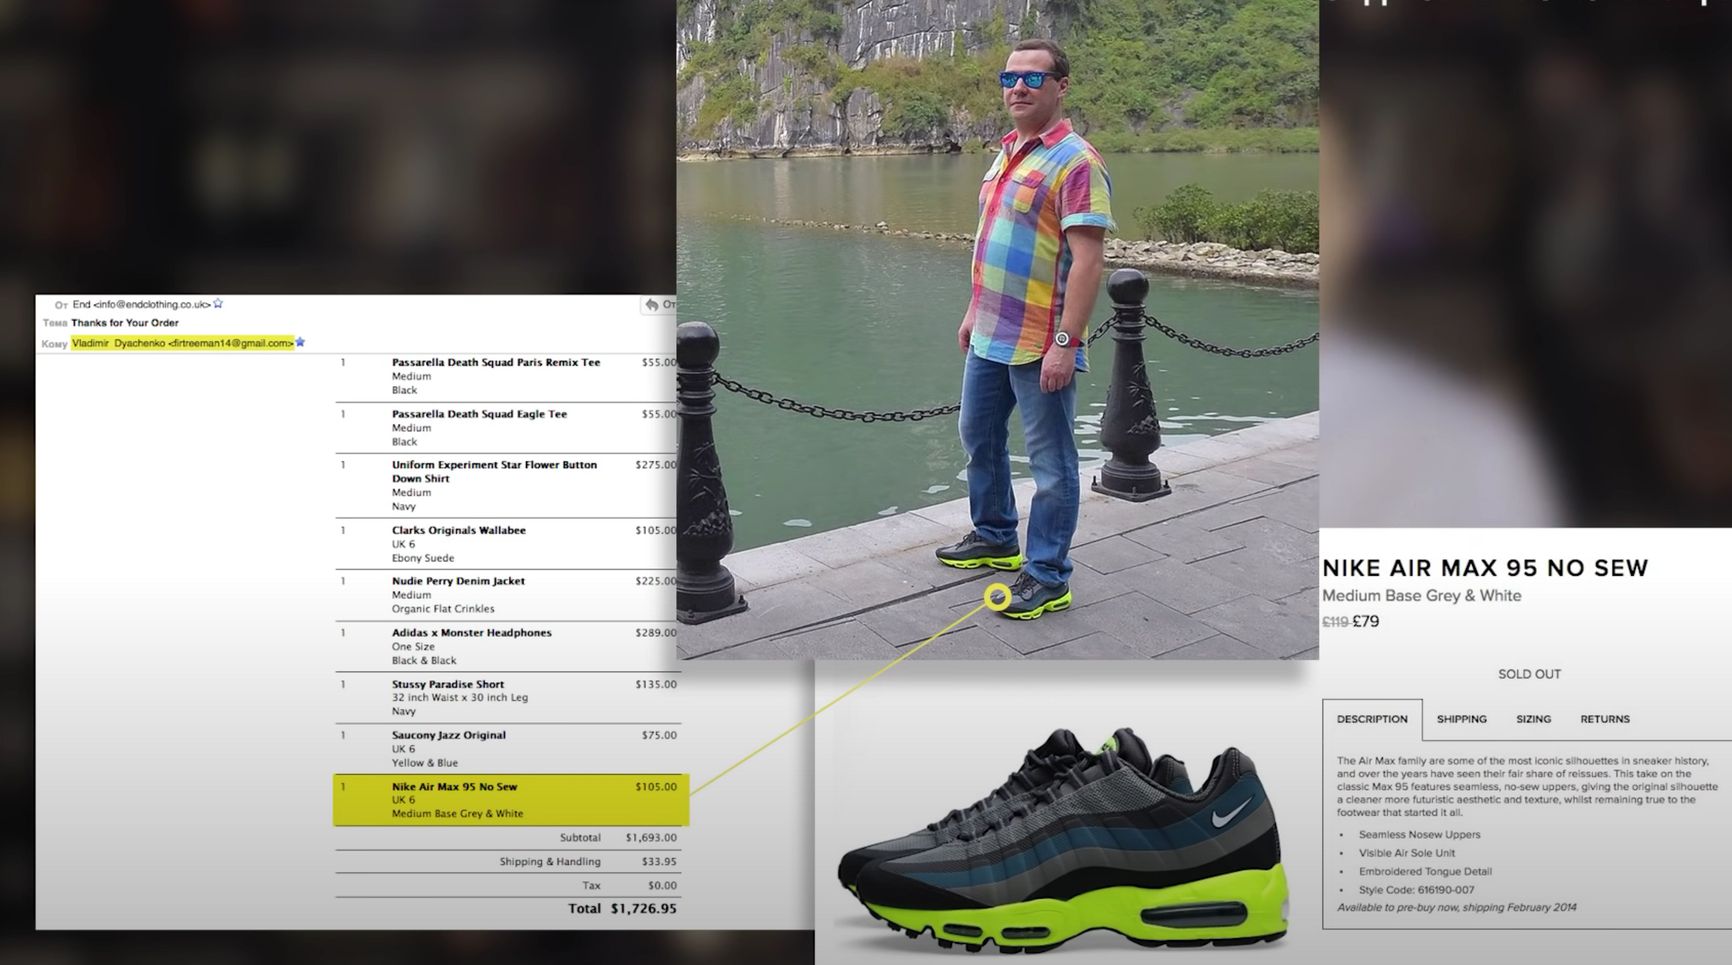 Through his nominee Vladimir Dyachenko, Medvedev purchased everything he needed, including the famous sneakers